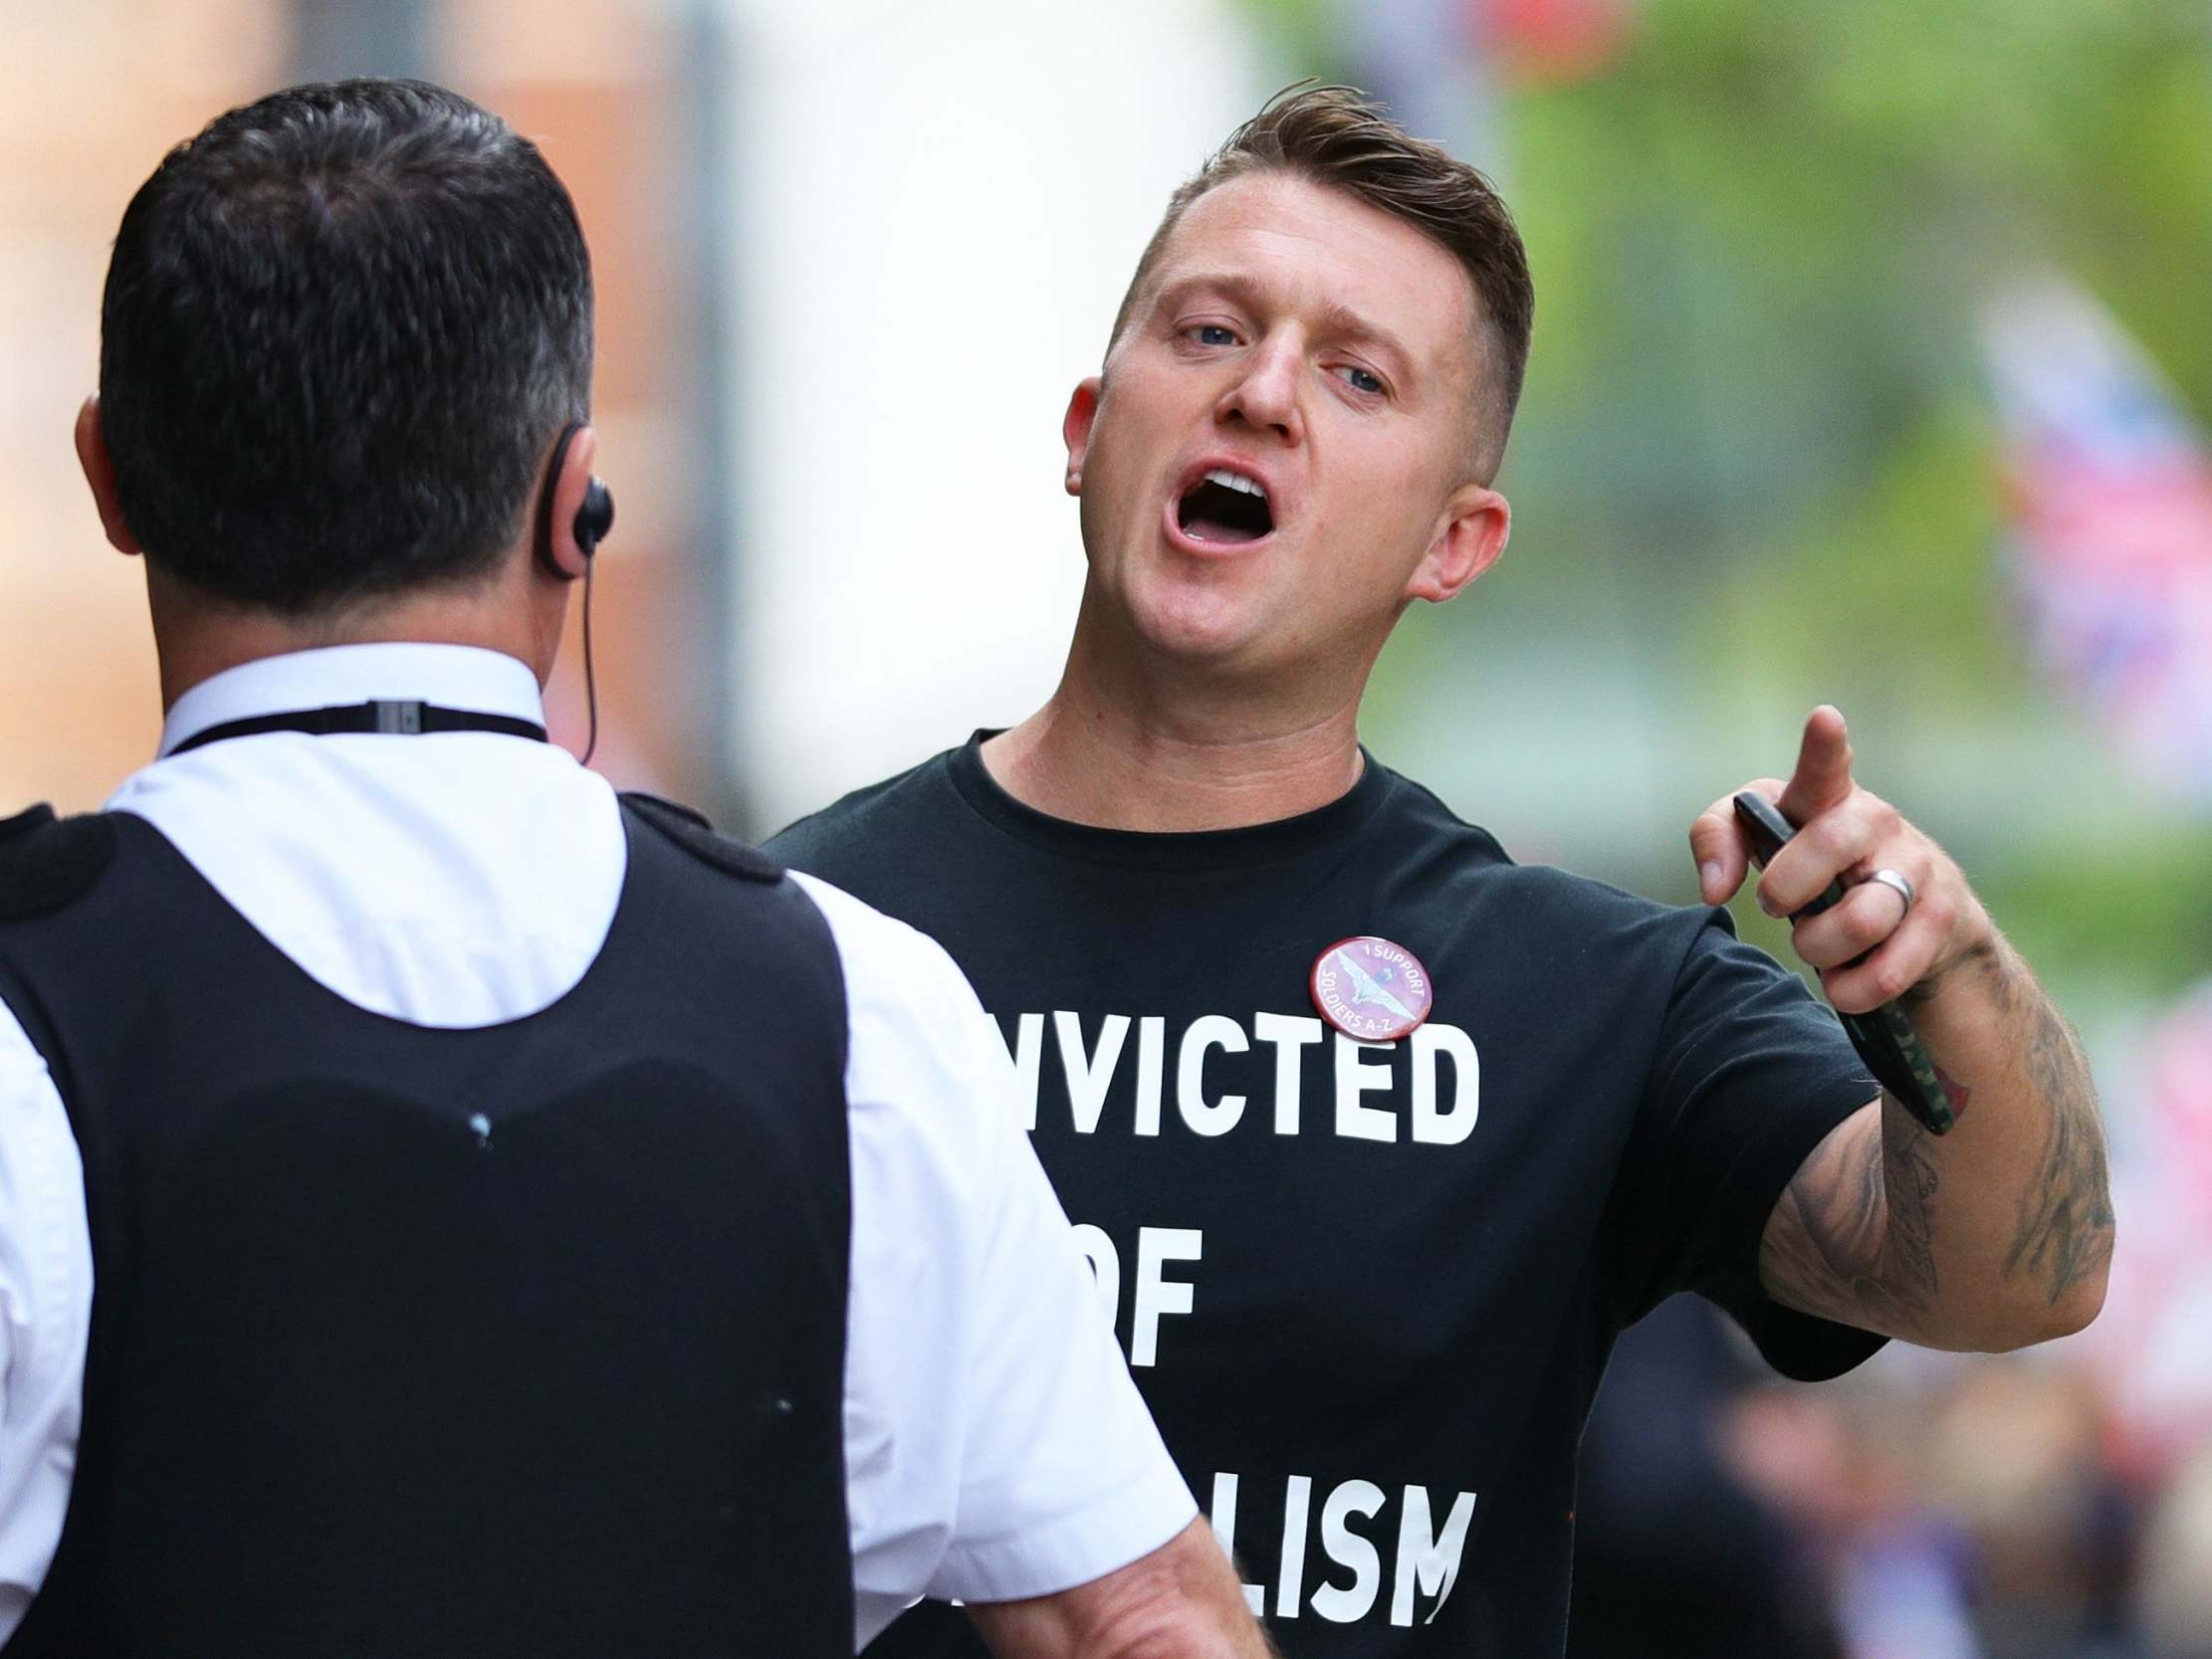 Tommy Robinson is among the figures attempting to capitalise on the national debate